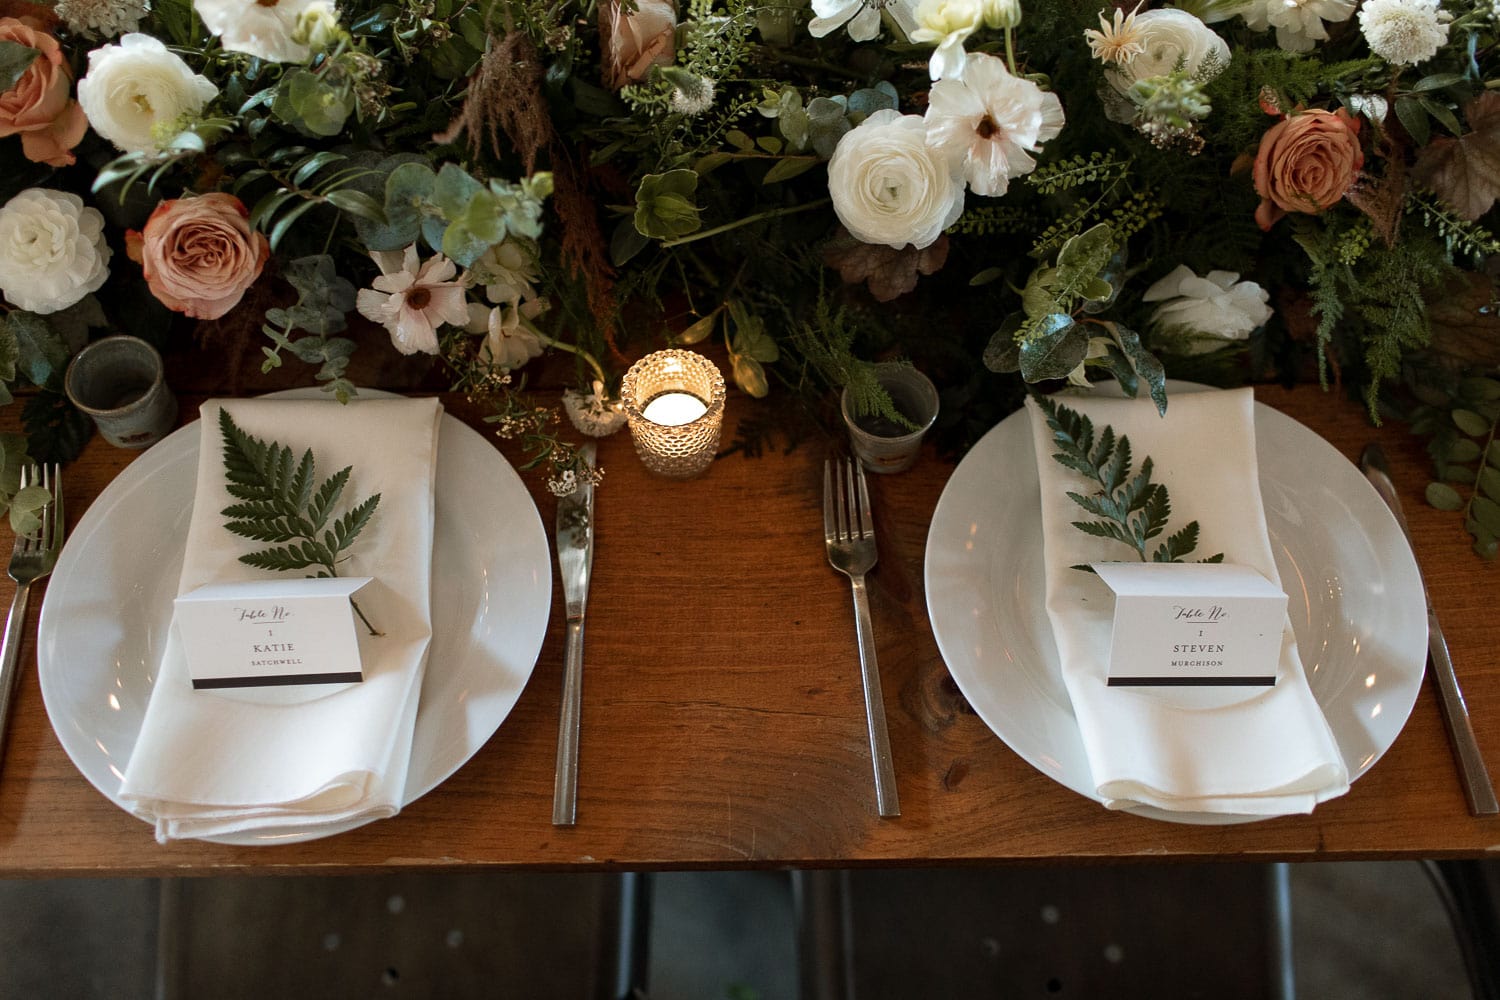 Closeup of a table with white and greenery running down the centerpiece. There are pops of peach in the roses. It looks very modern.